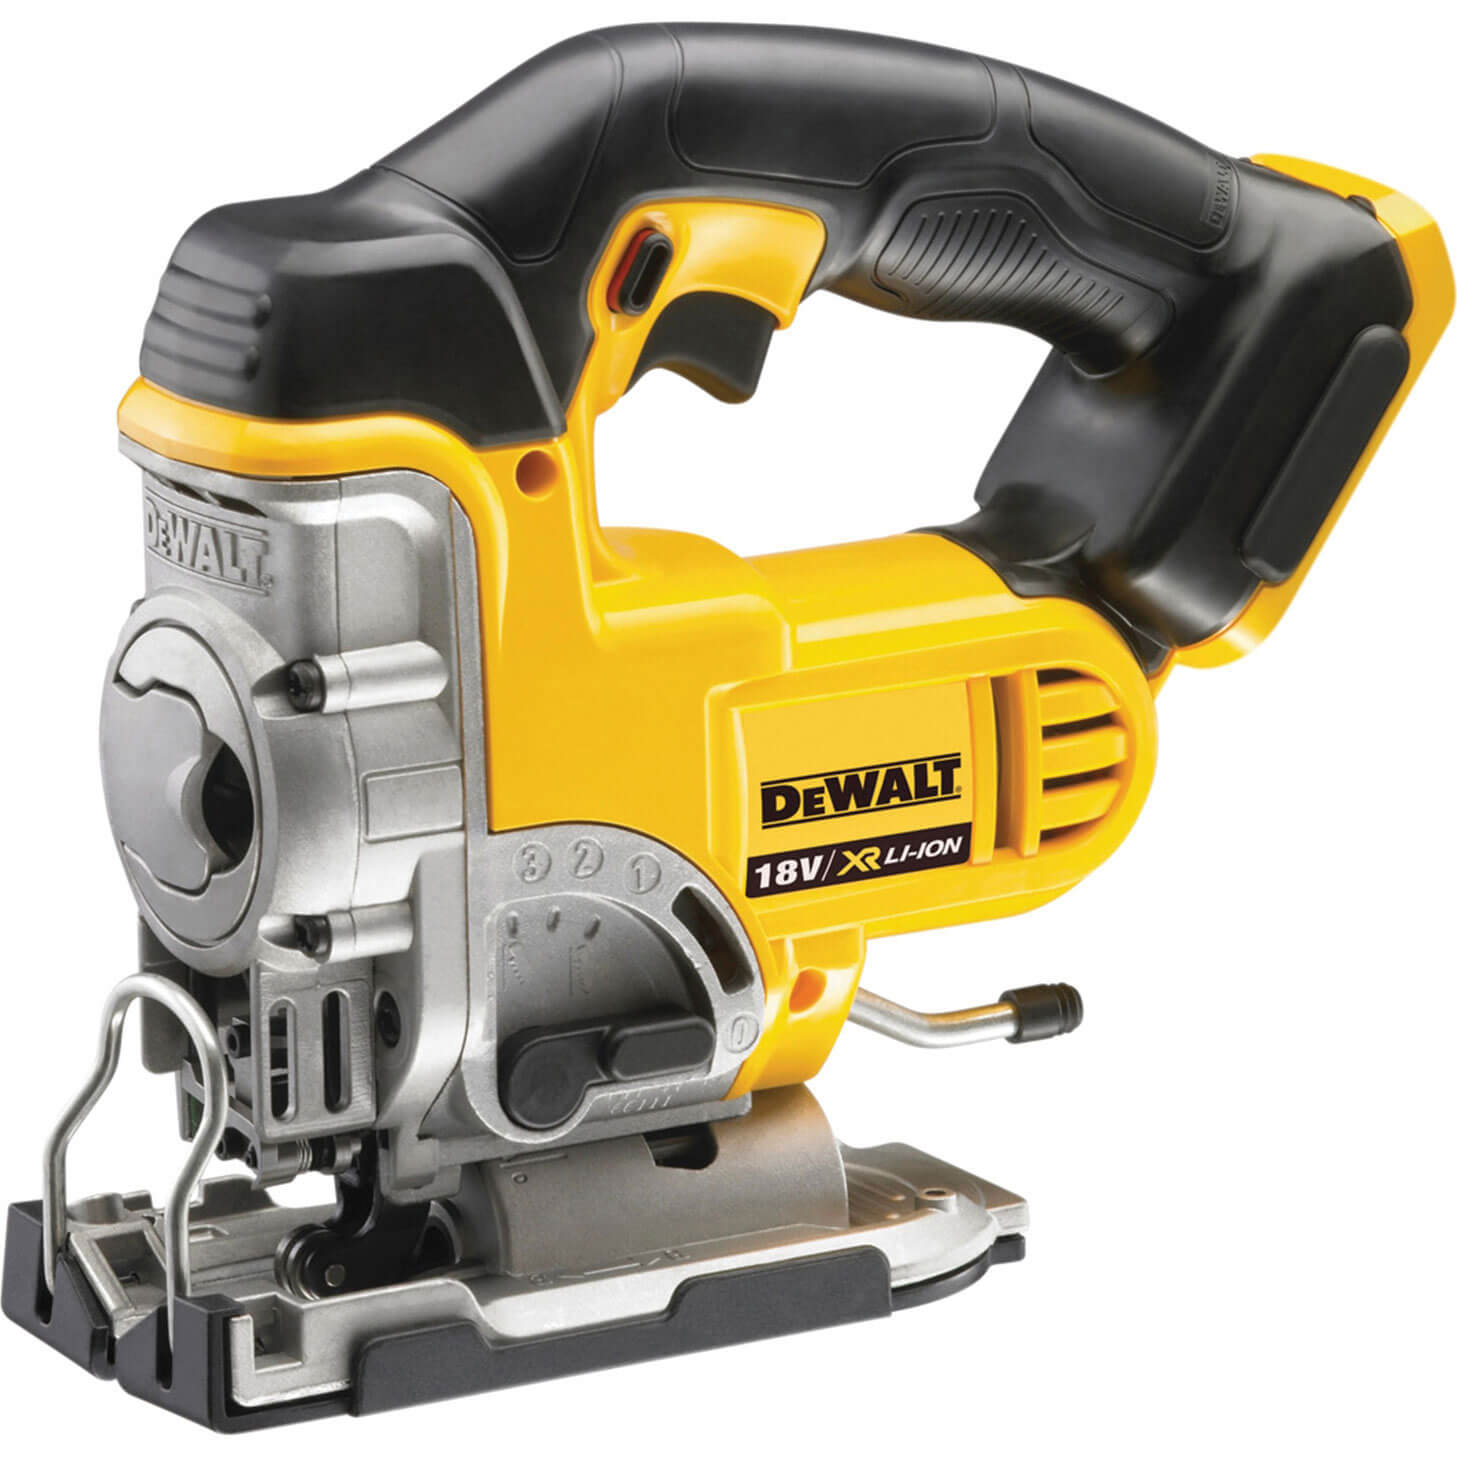 DeWalt DCS331N 18v Cordless XR Jigsaw without Battery or Charger